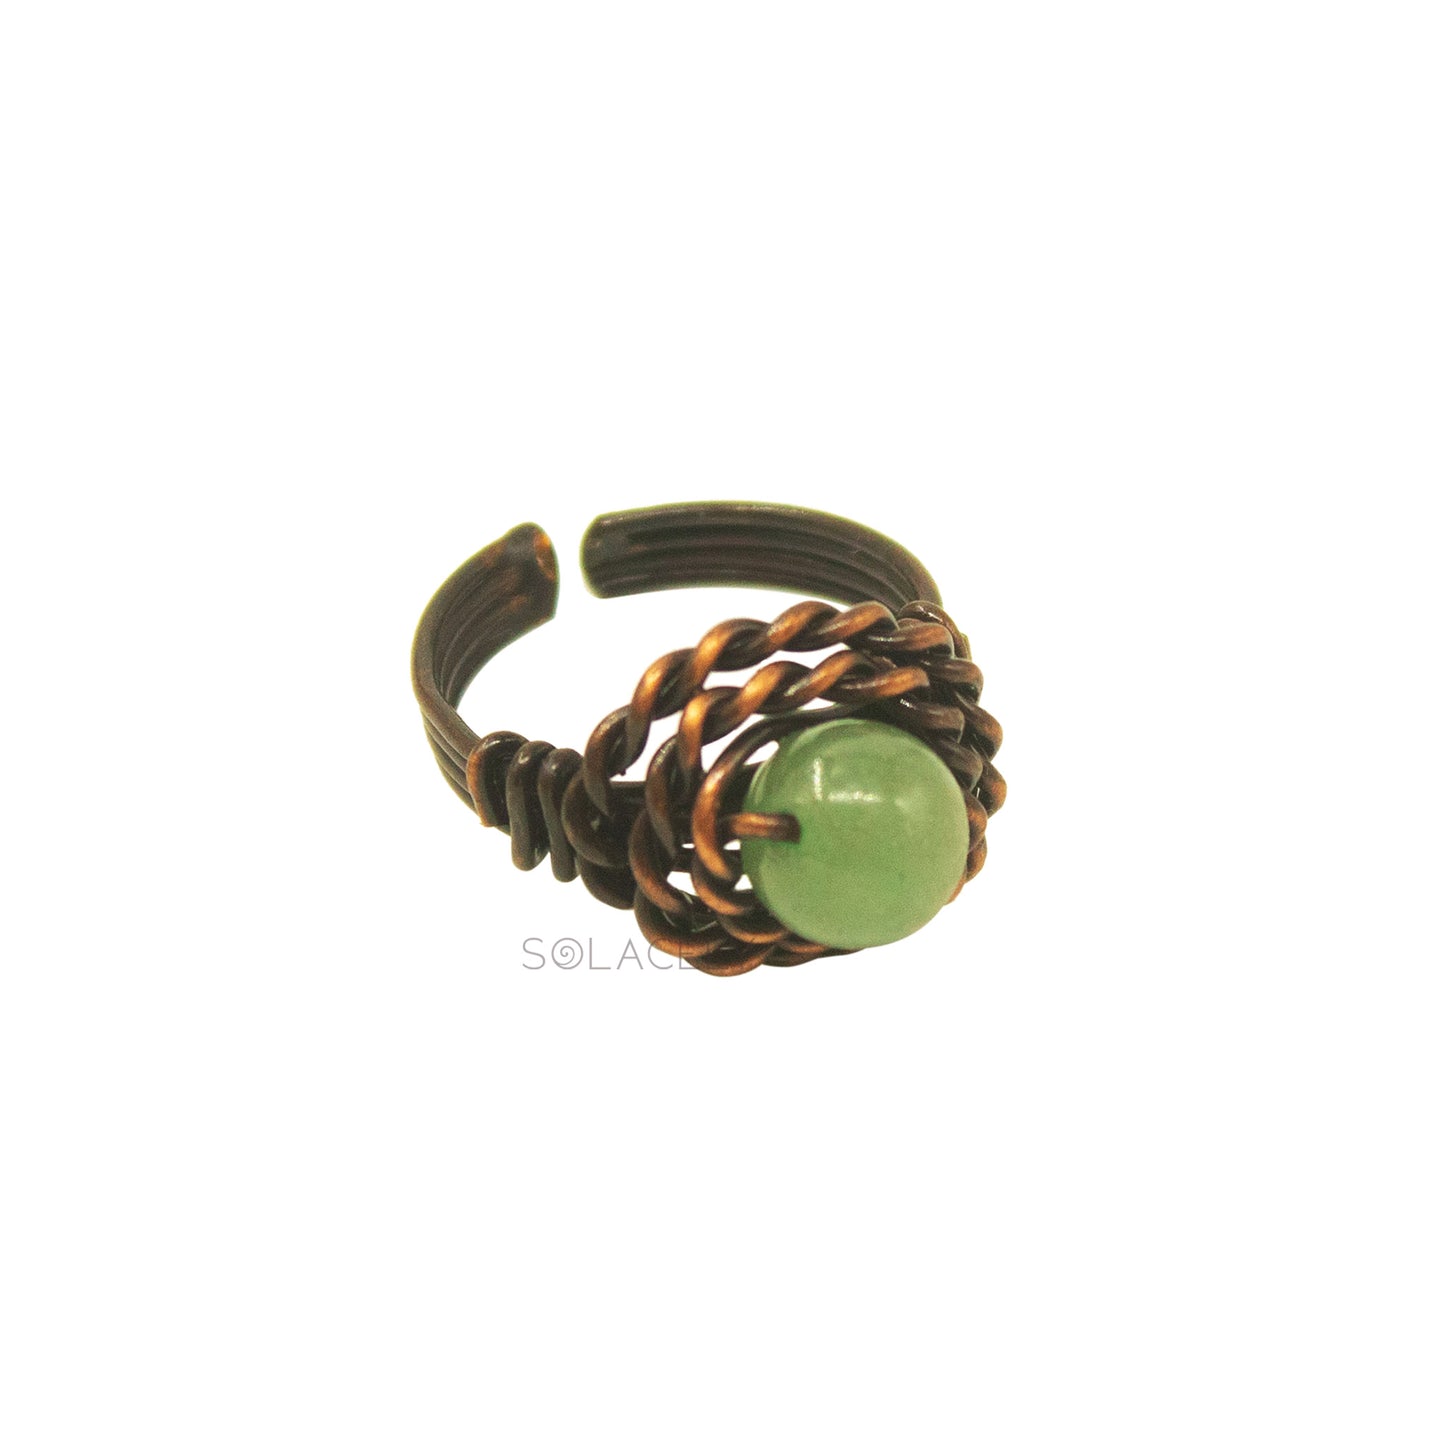 Antique Copper Wire Wrapped Ring with Green Aventurine Stone